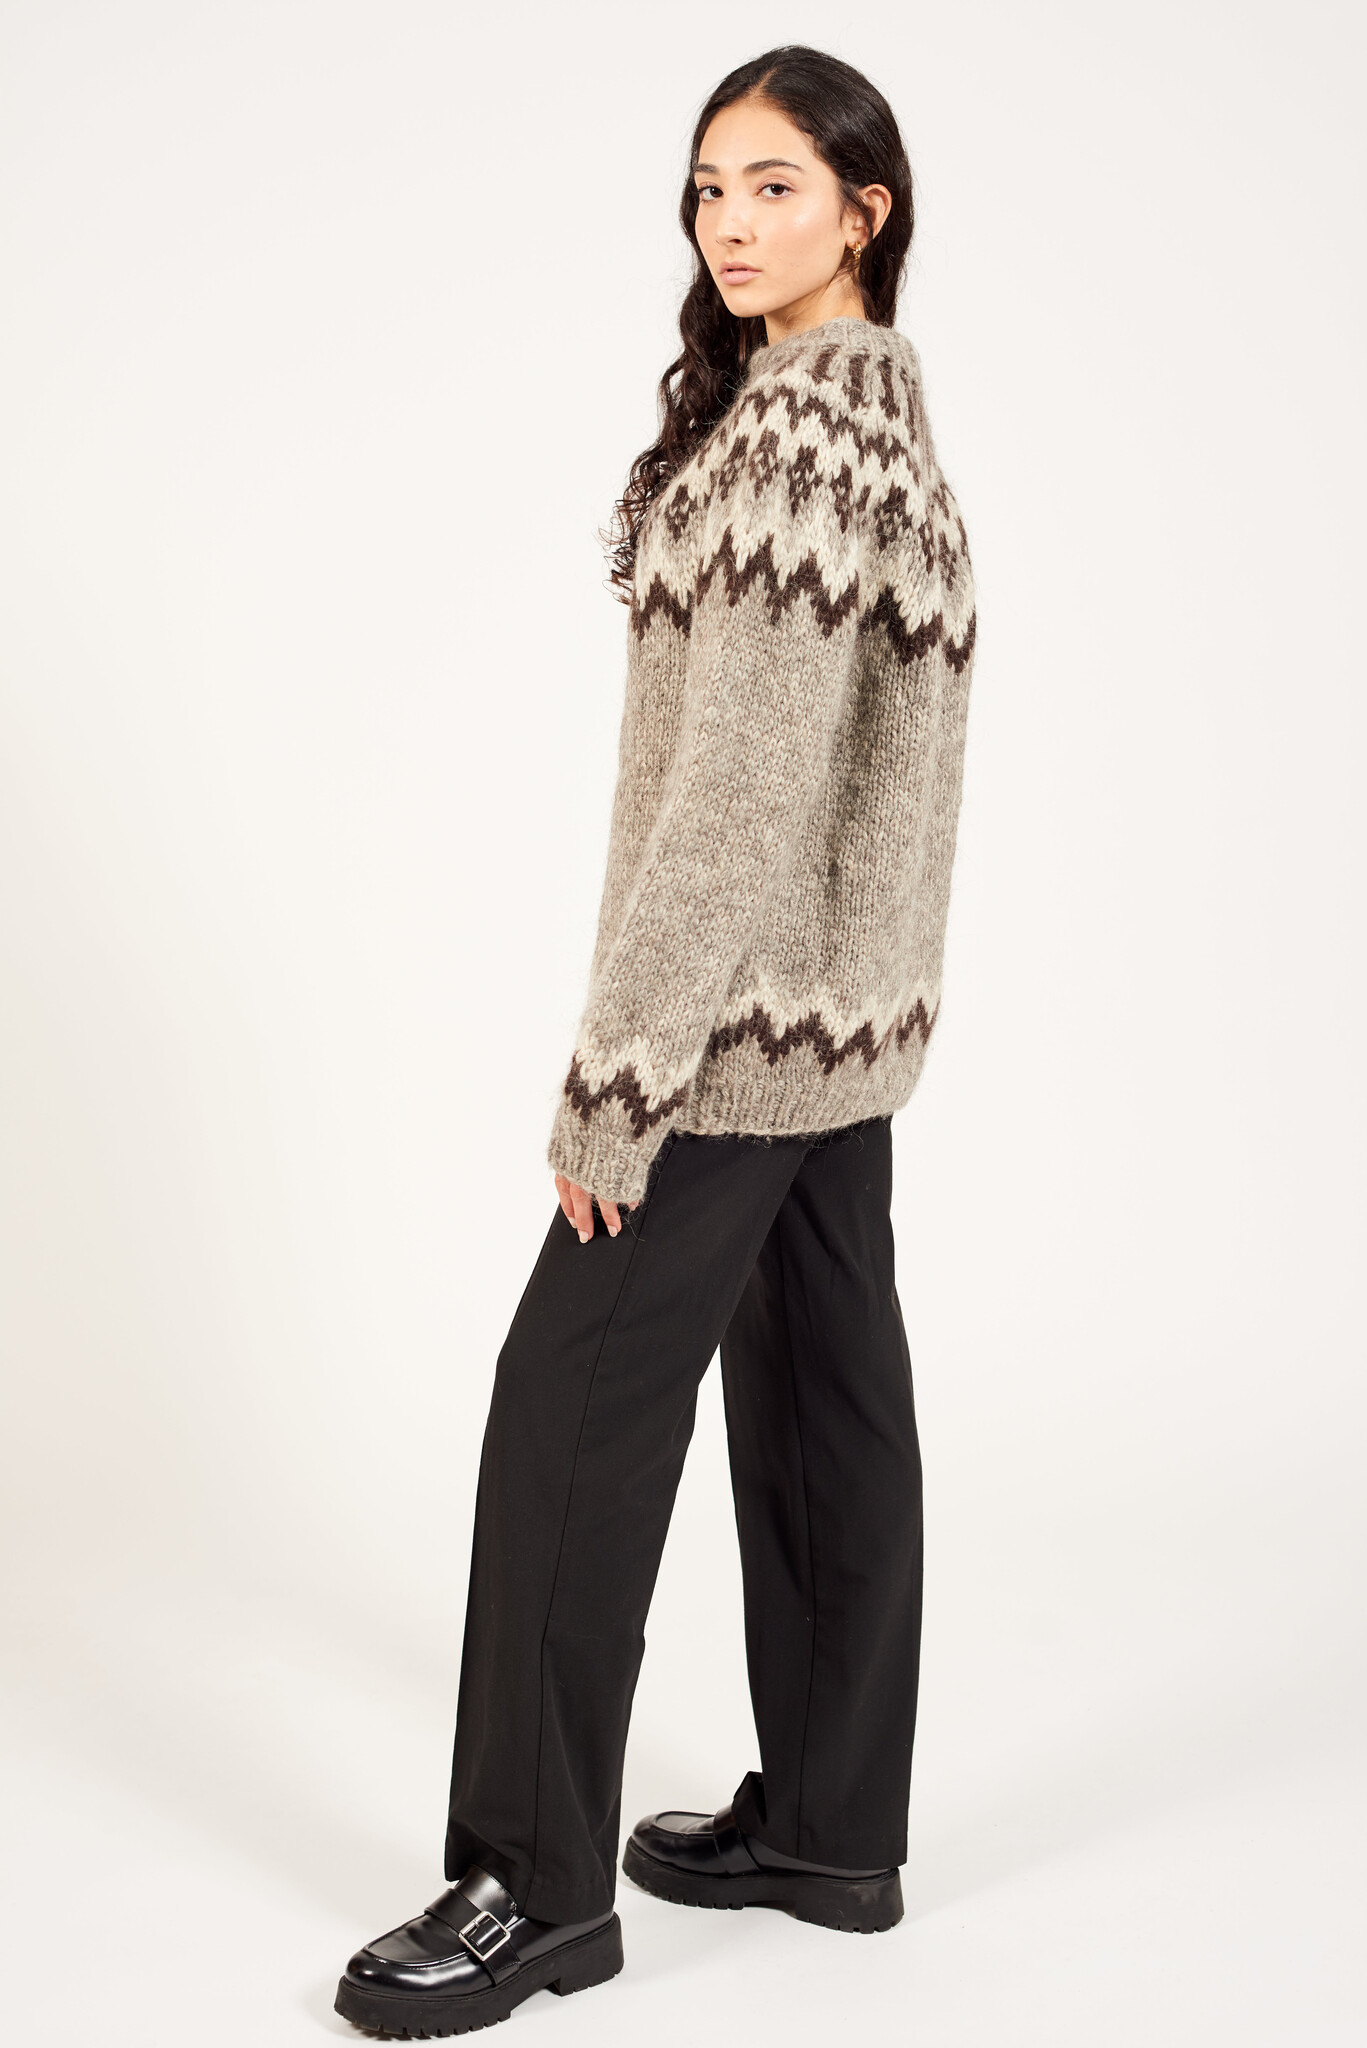 Icelandic hand knitted wool jumper